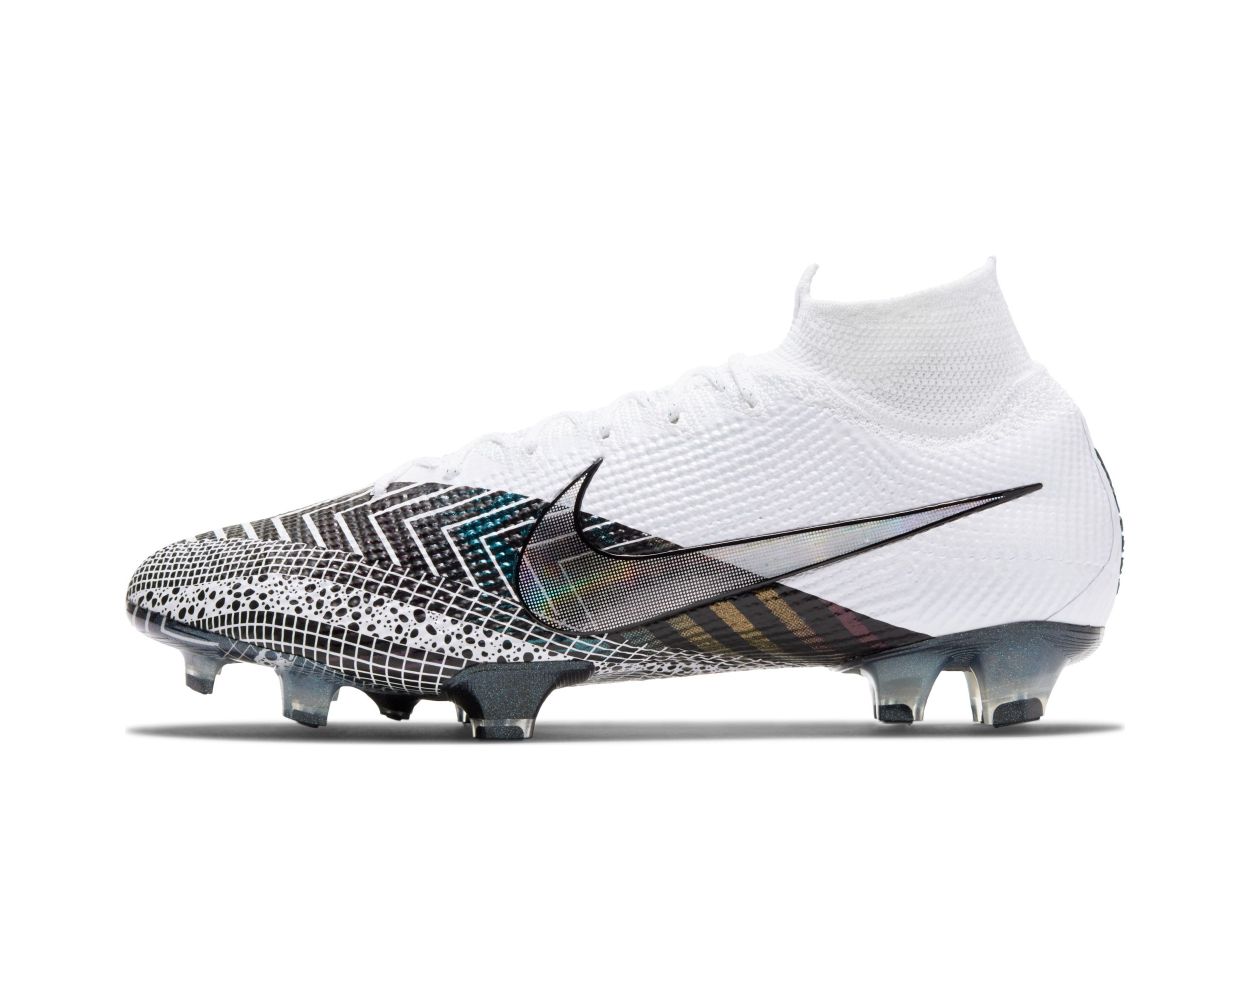 Nike Men's Mercurial Superfly 7 Elite MDS Firm Ground cleats - White Black